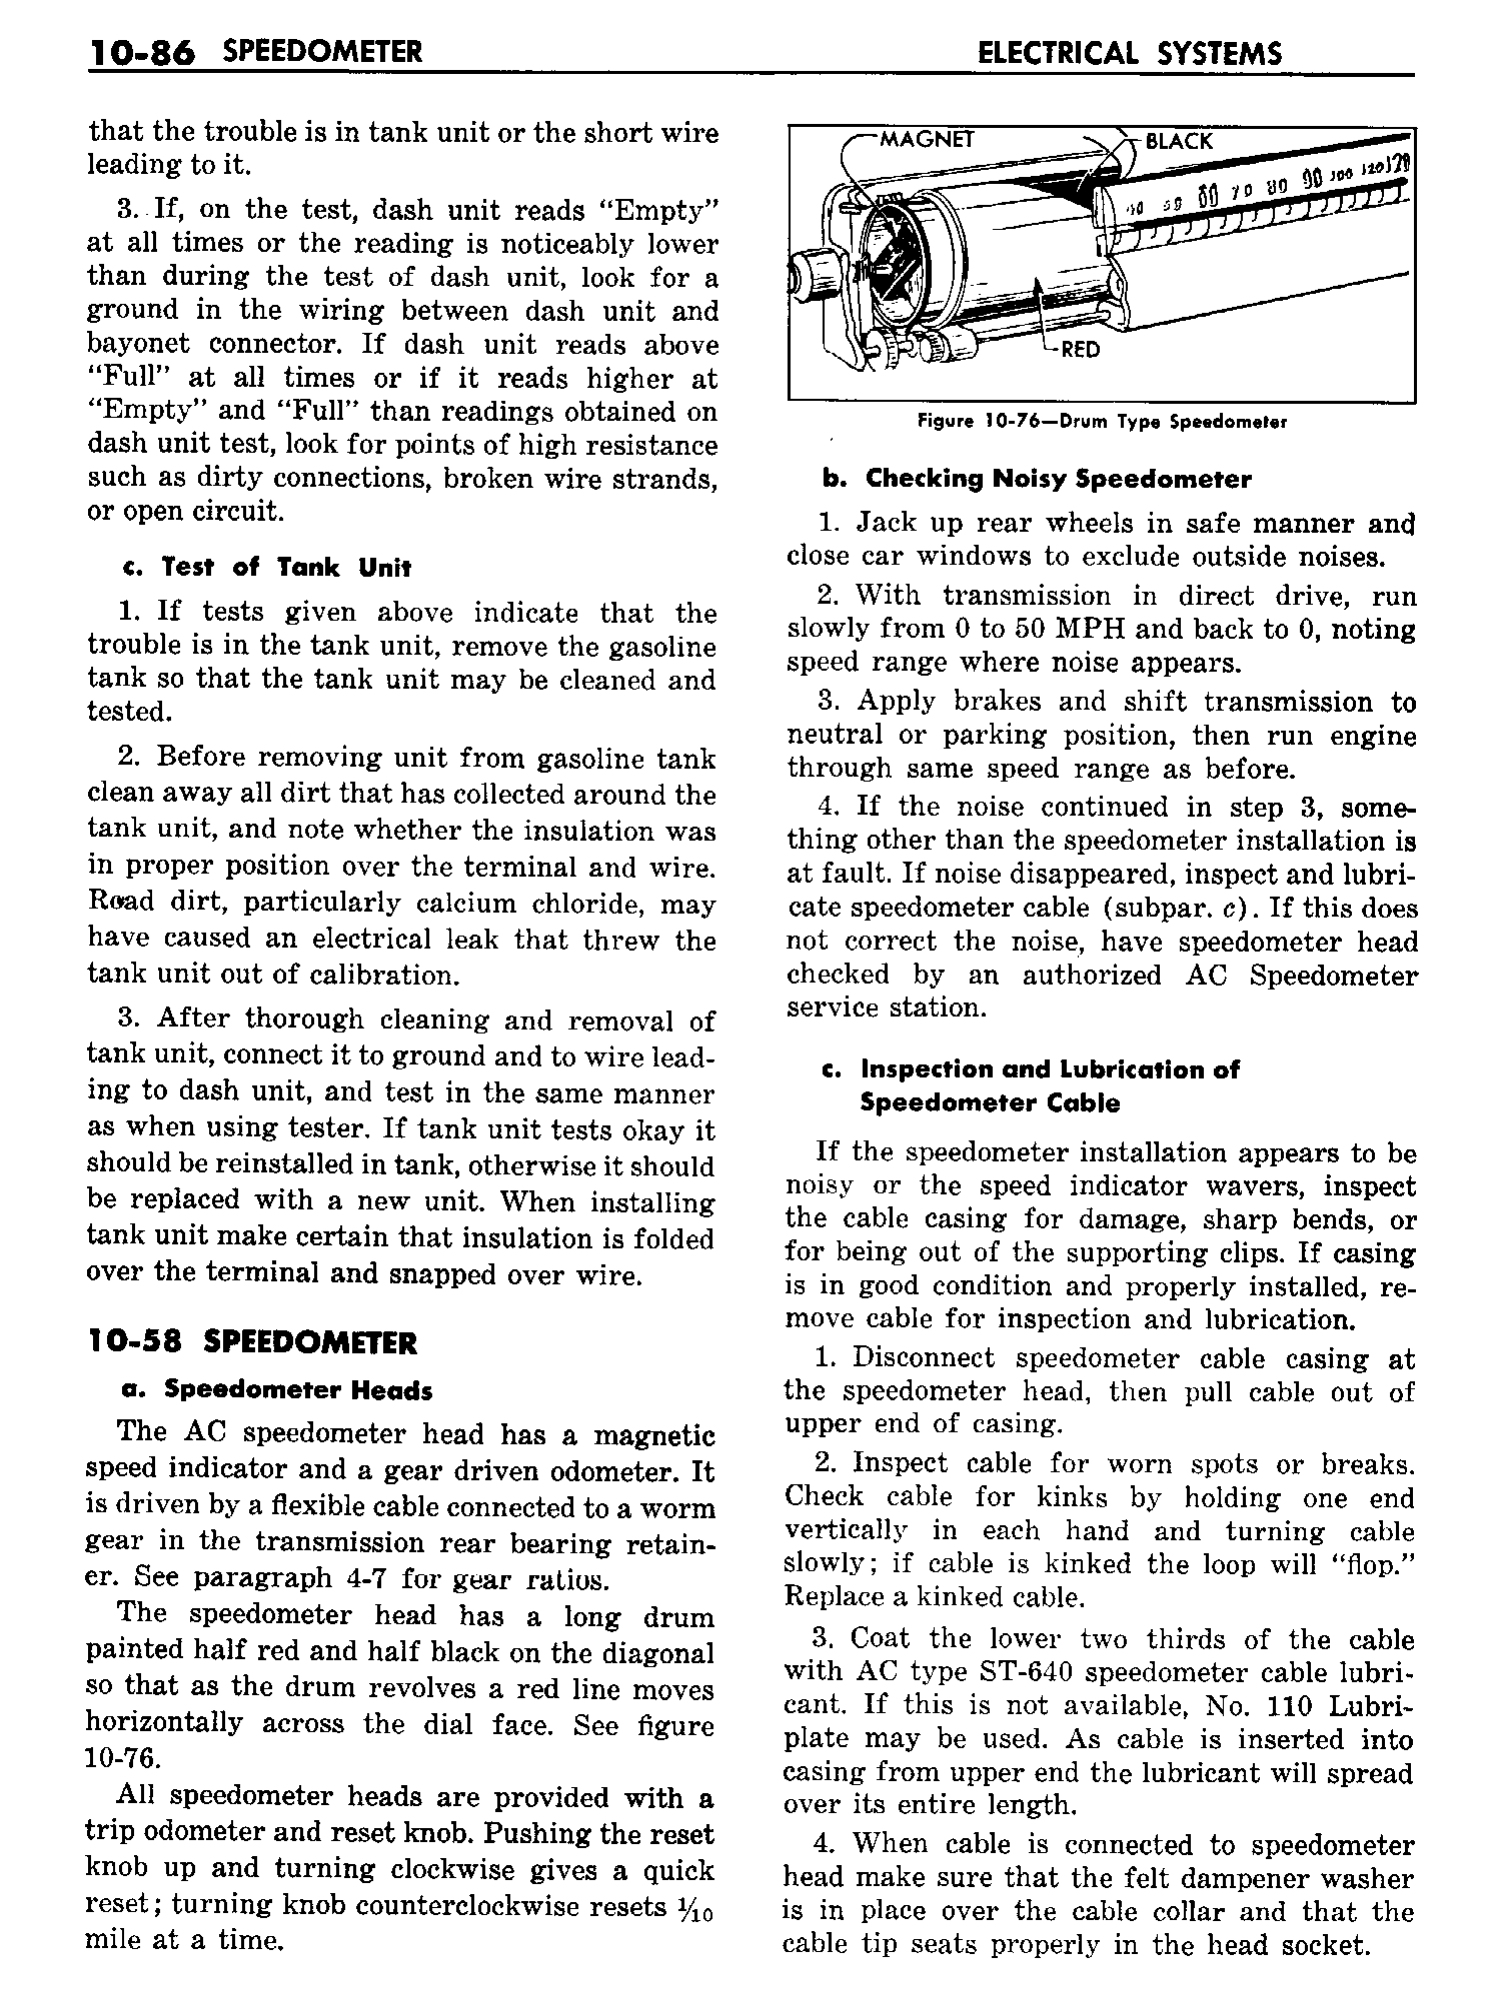 n_11 1958 Buick Shop Manual - Electrical Systems_86.jpg